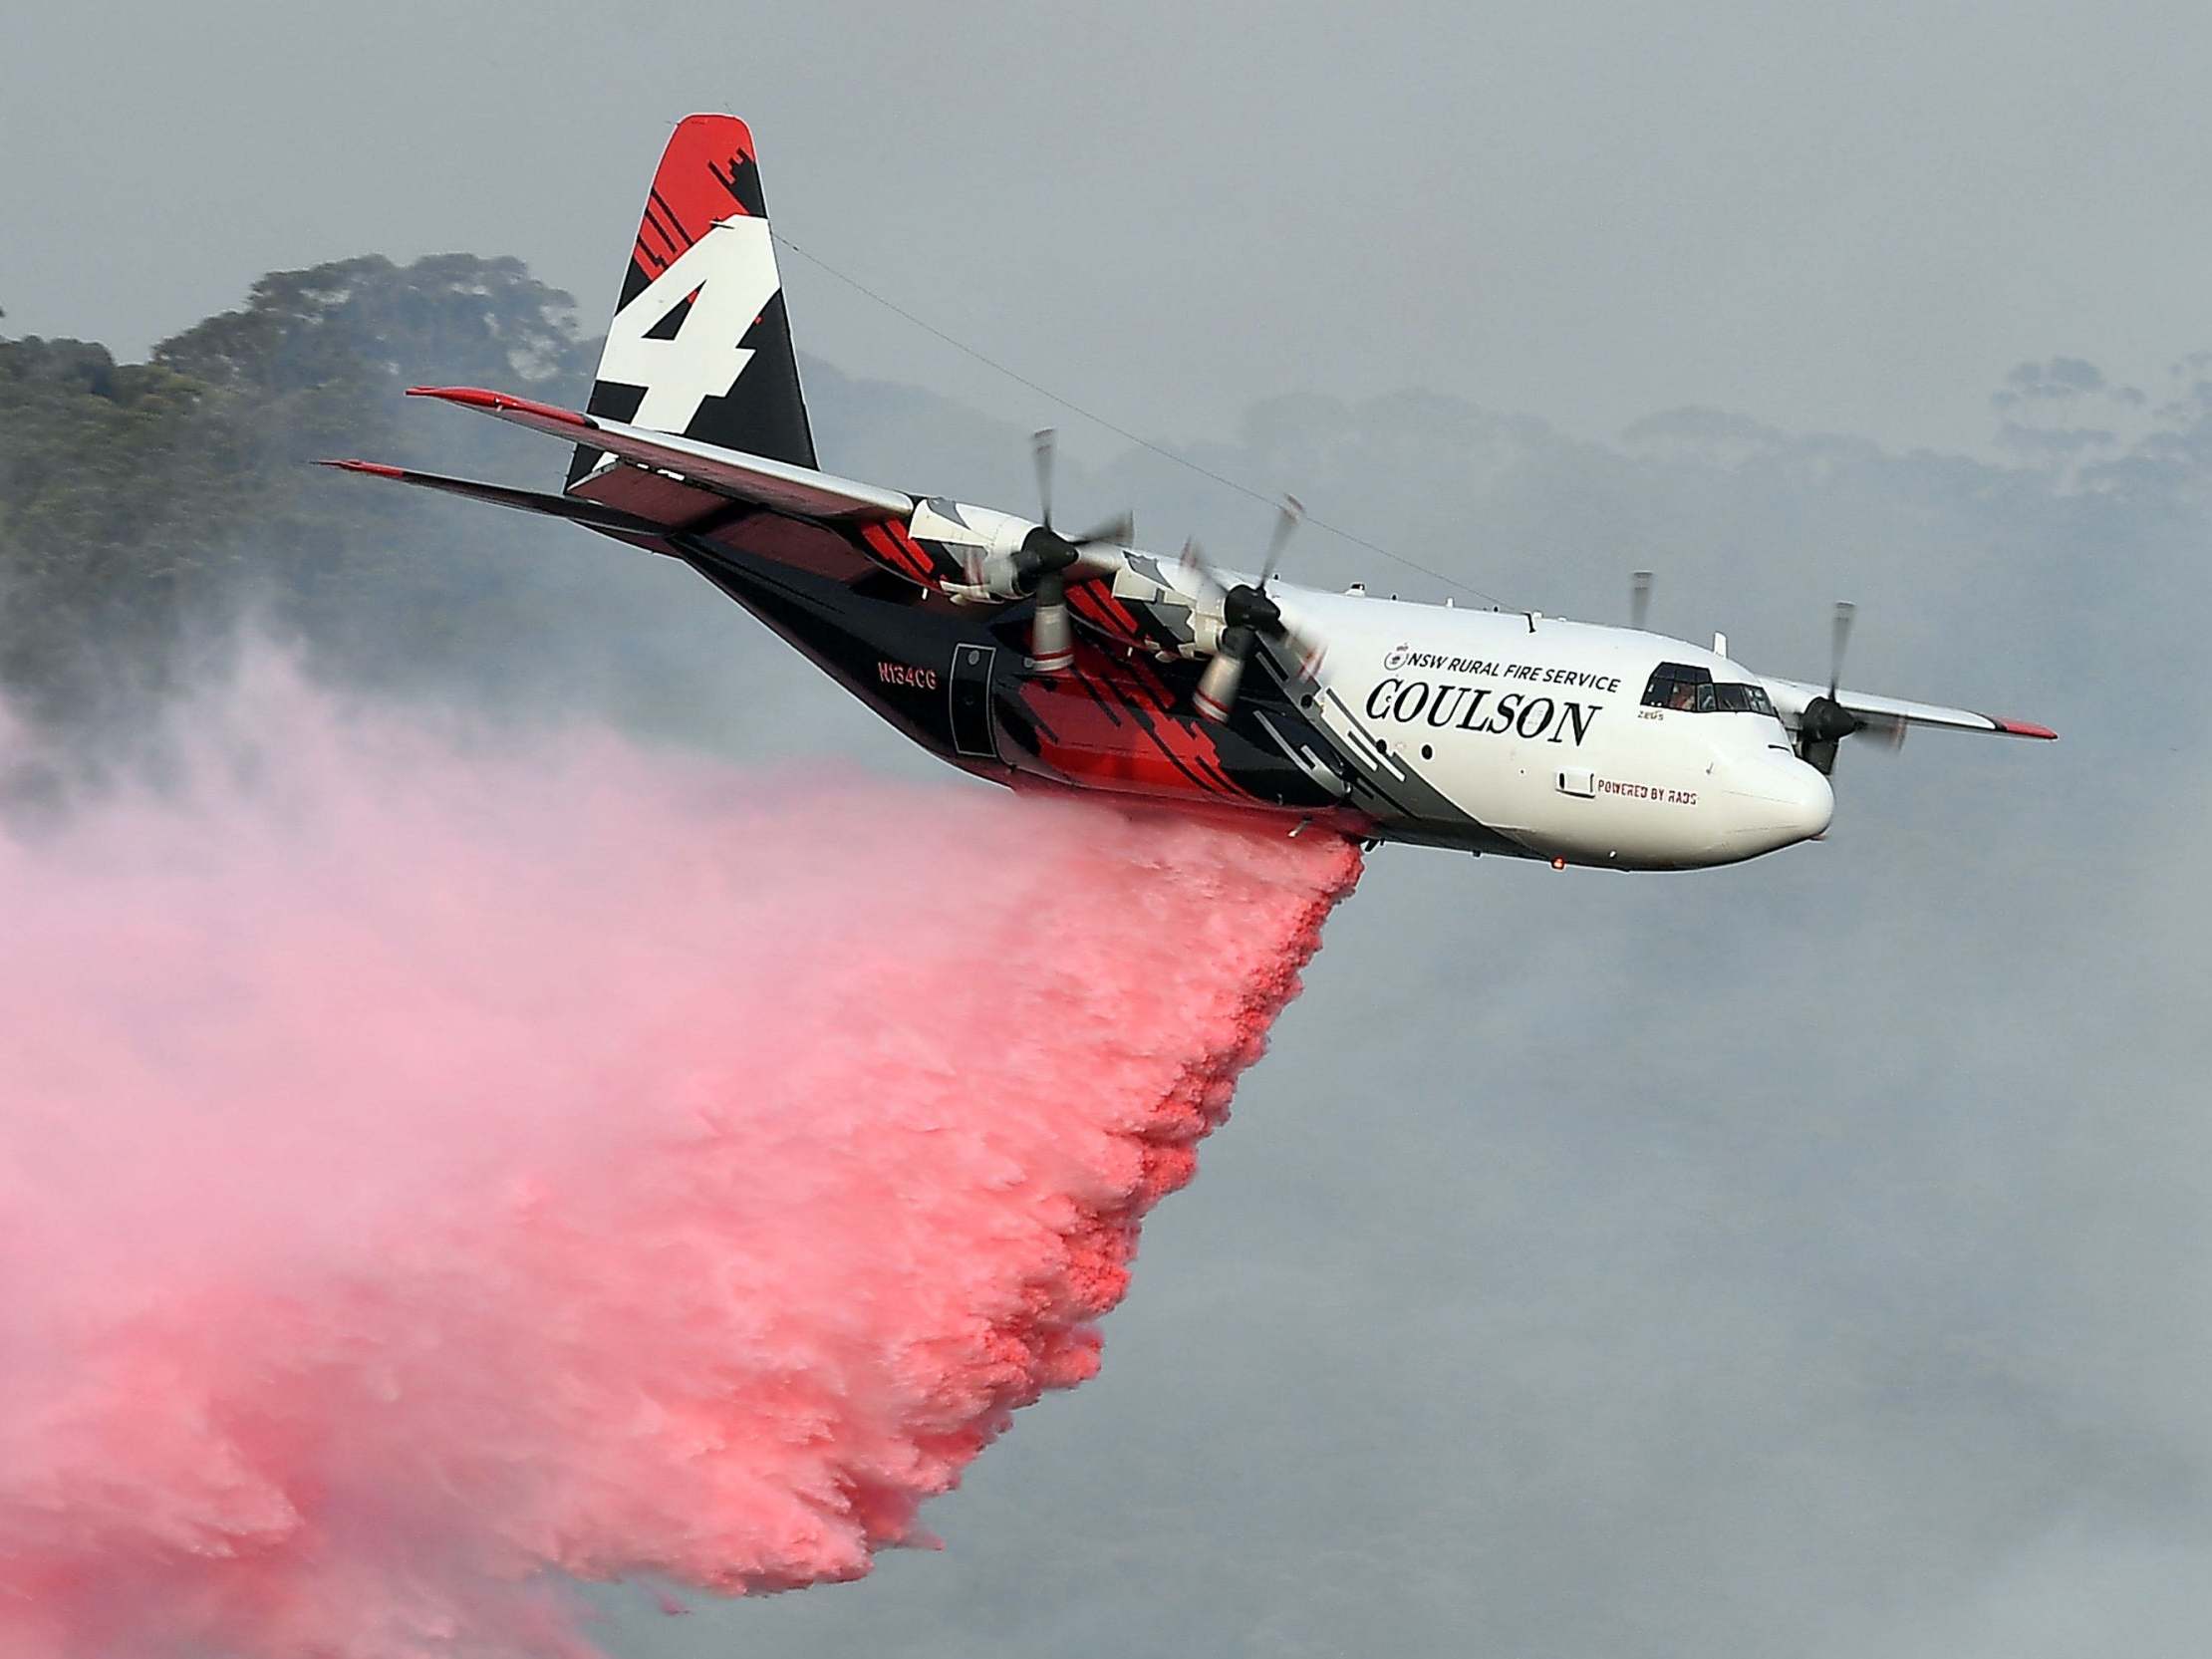 The C-130 Hercules which crashed, seen dropping fire retardant